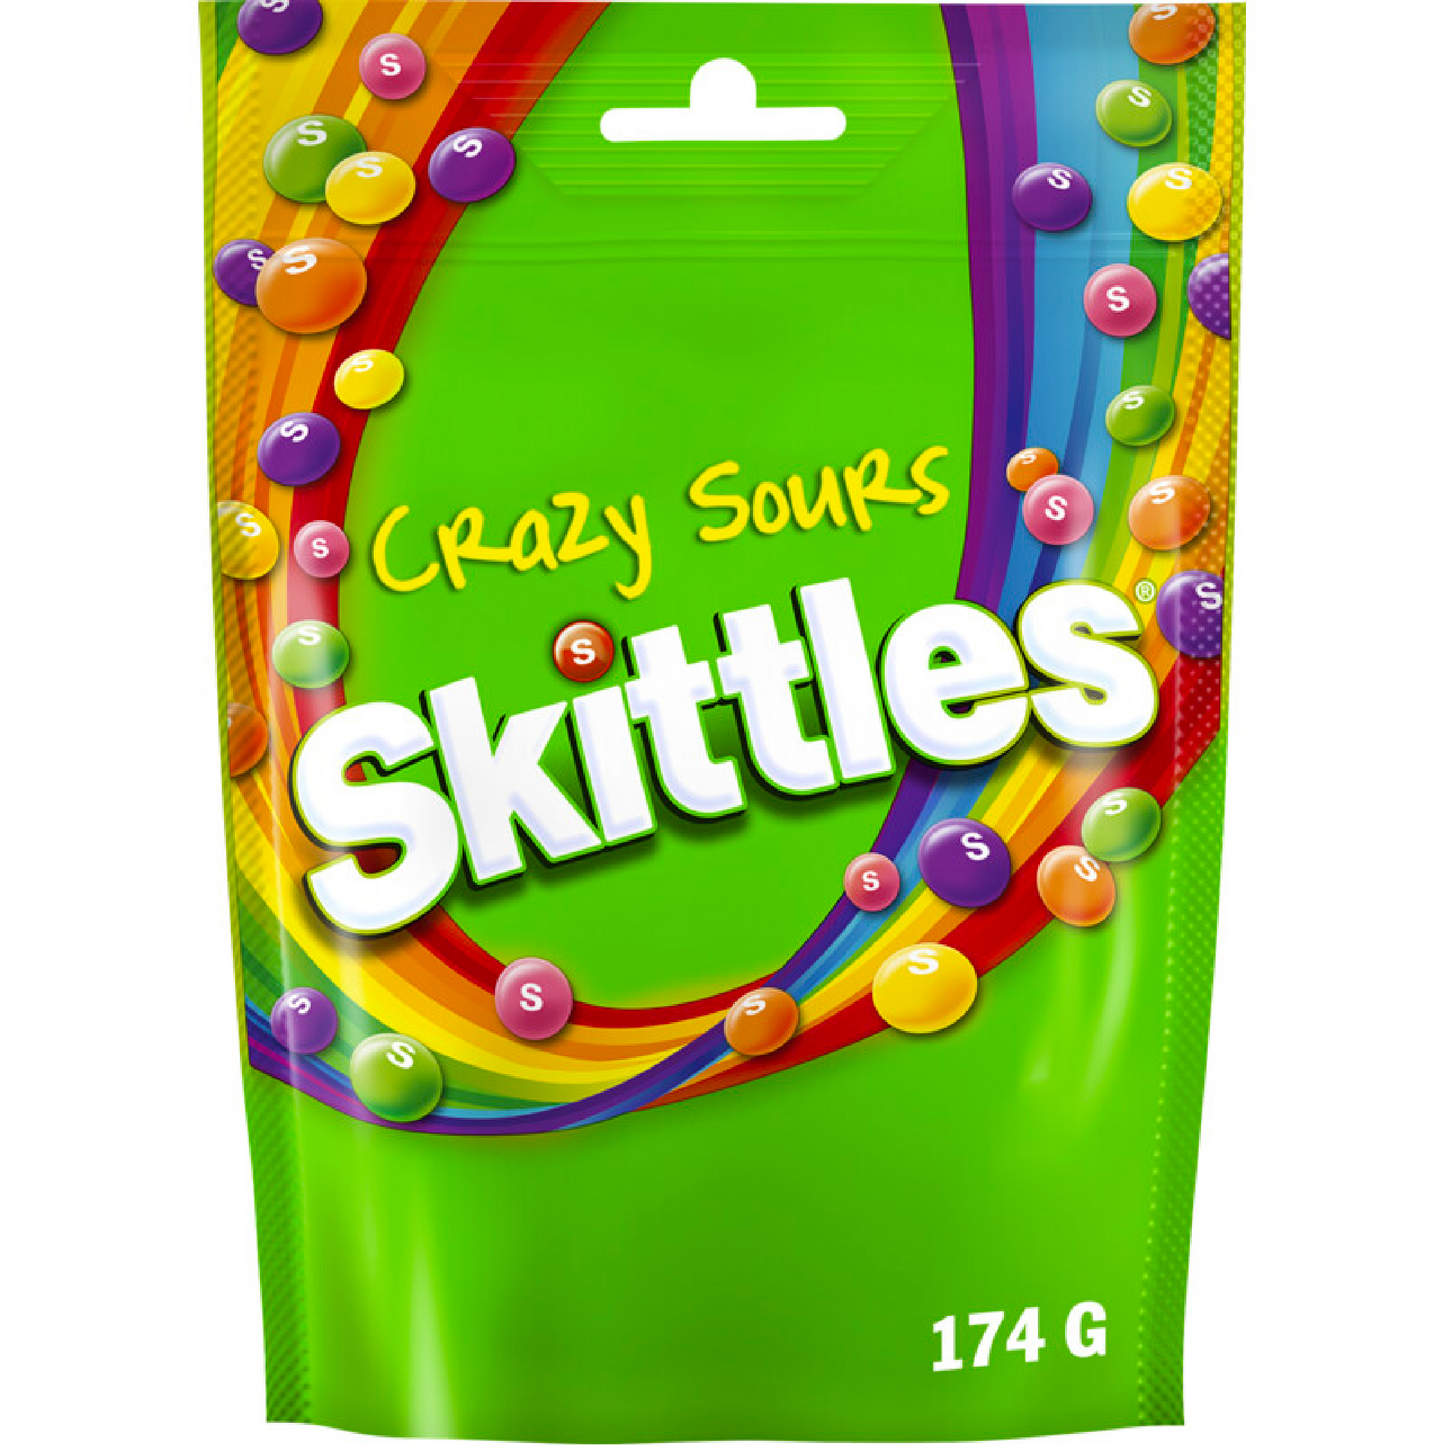 Skittles Crazy Sours 175g - Snack-It